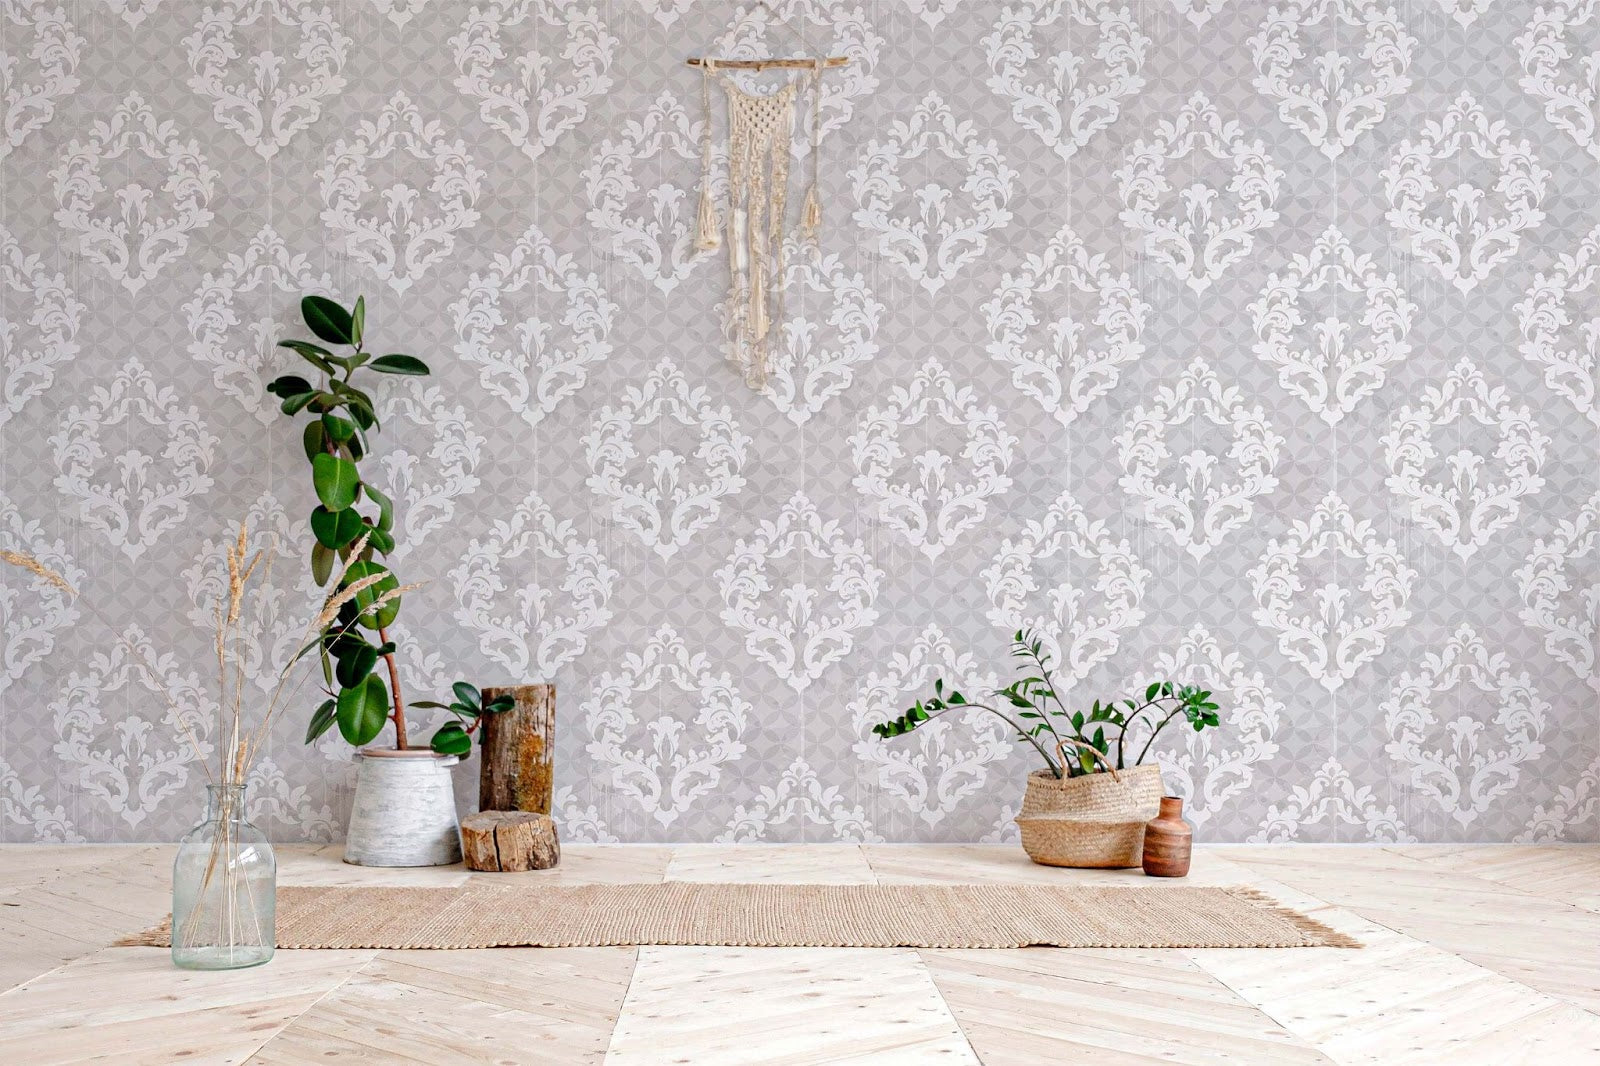 How To Prep Walls For Peel And Stick Wallpaper